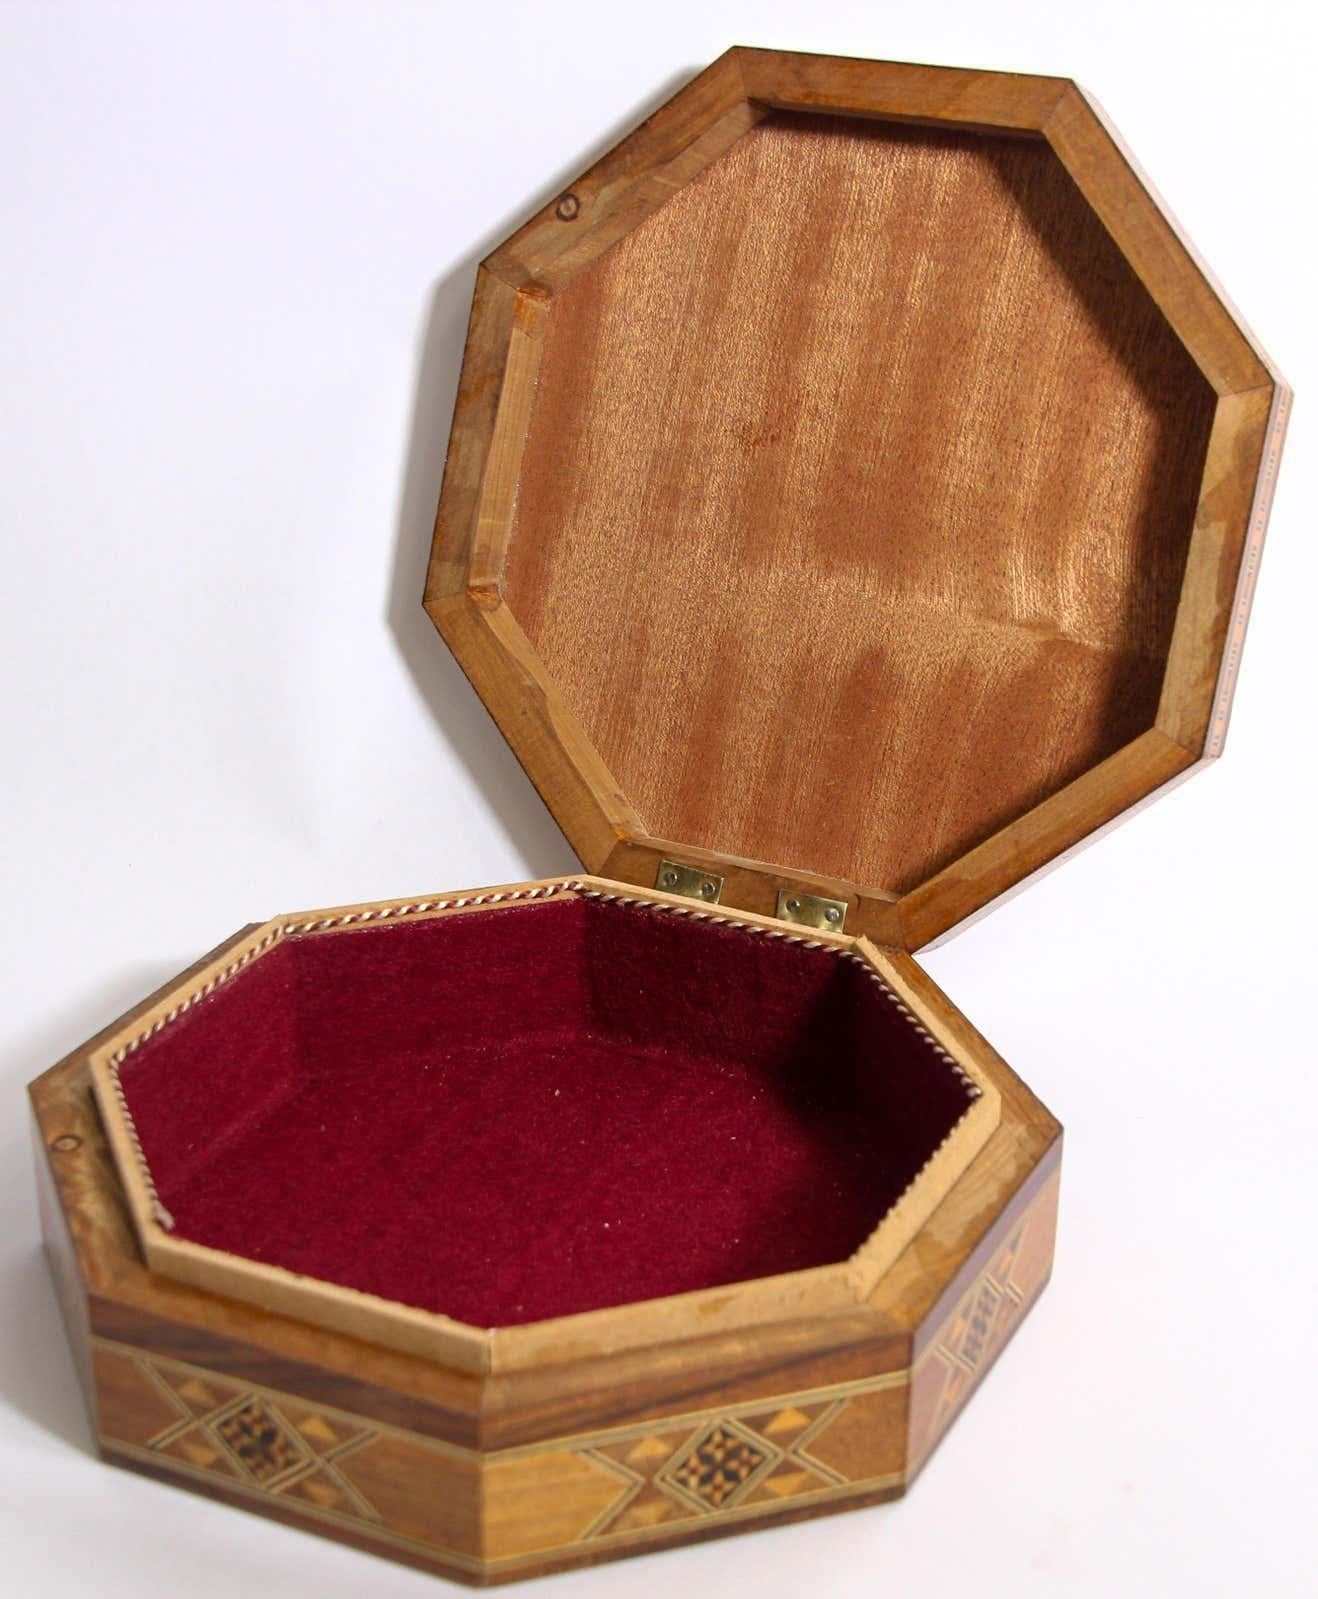 Large Moorish inlaid marquetry mosaic octagonal jewelry box.
The amazing craftsmanship in intricate marquetry fruitwood with mosaic Moorish geometric pattern mosaic inlay makes it a true work of art.
Handcrafted in the Middle Easter Moorish Syrian